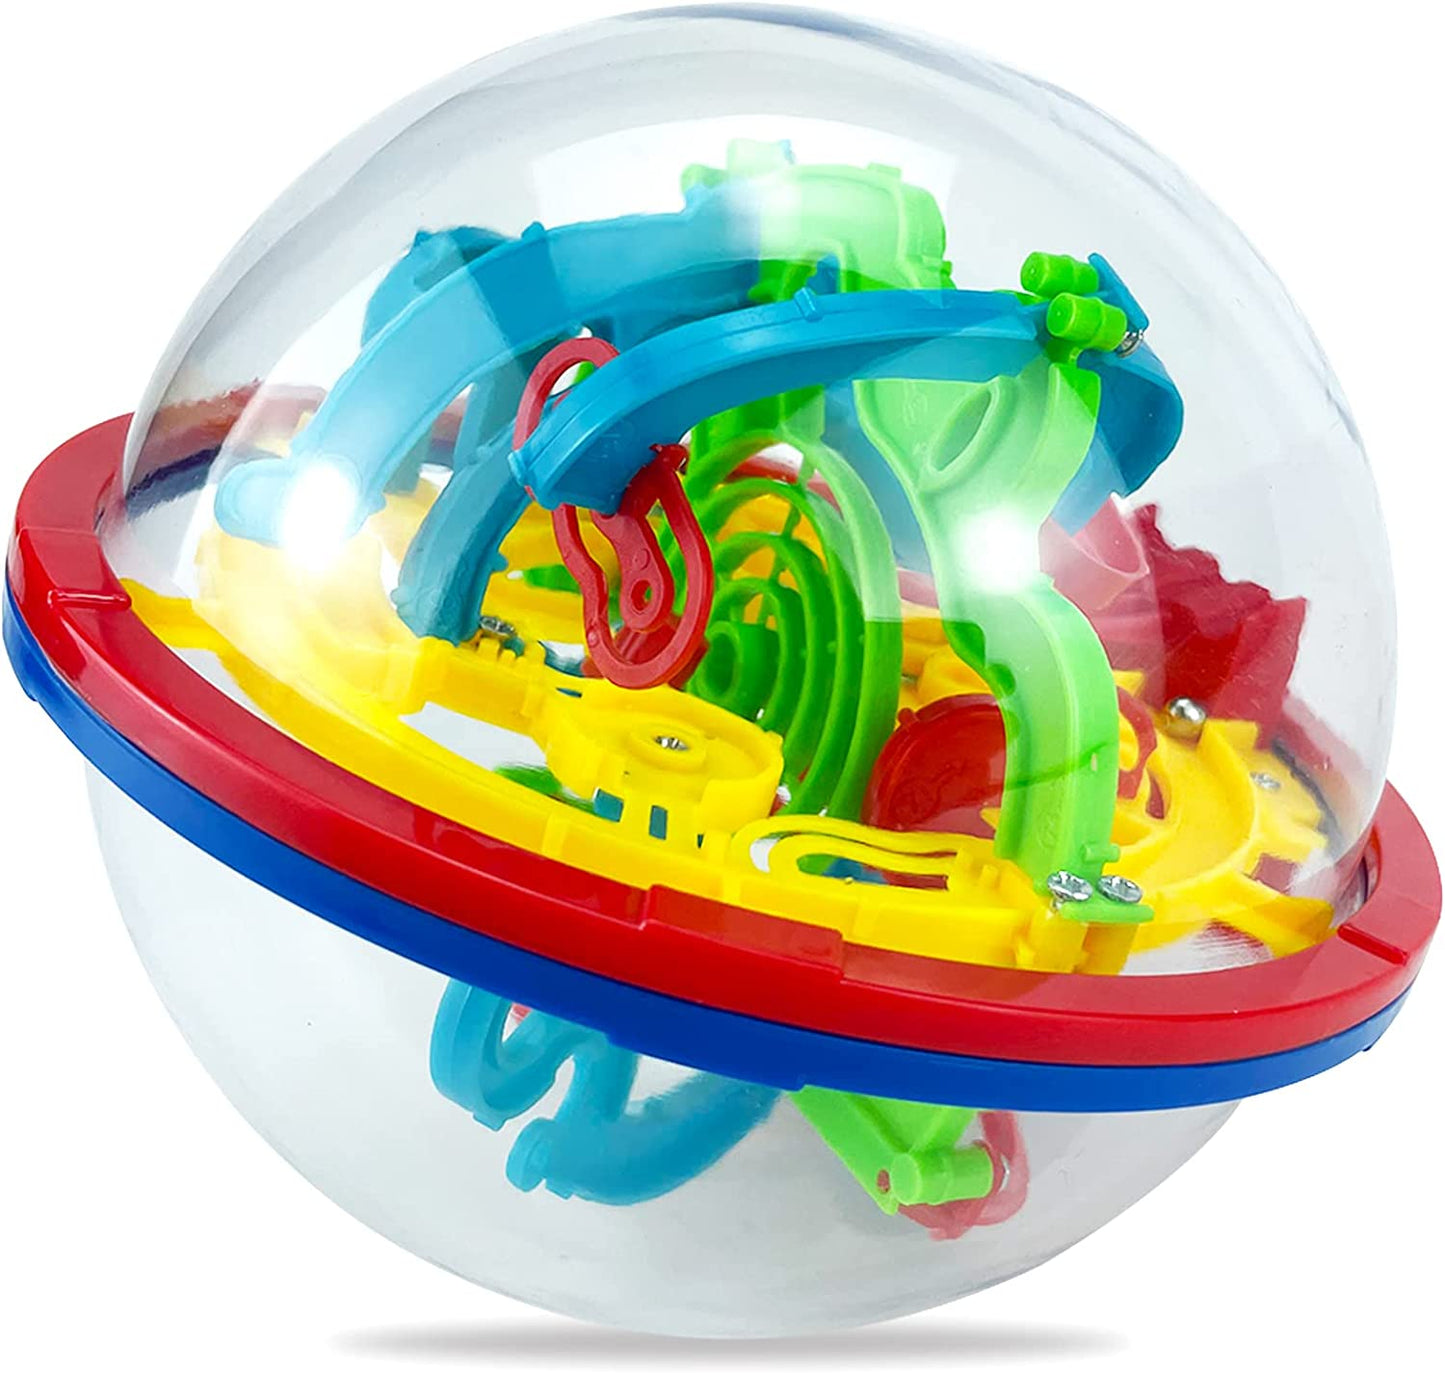 Maze Ball Brain Games | Puzzle Ball Games for Kids Ages n Adults, Brain Teaser Fidget Toys - Magic 3D Gravity Maze Ball for Boys Girls Birthday Gifts Classroom Prize